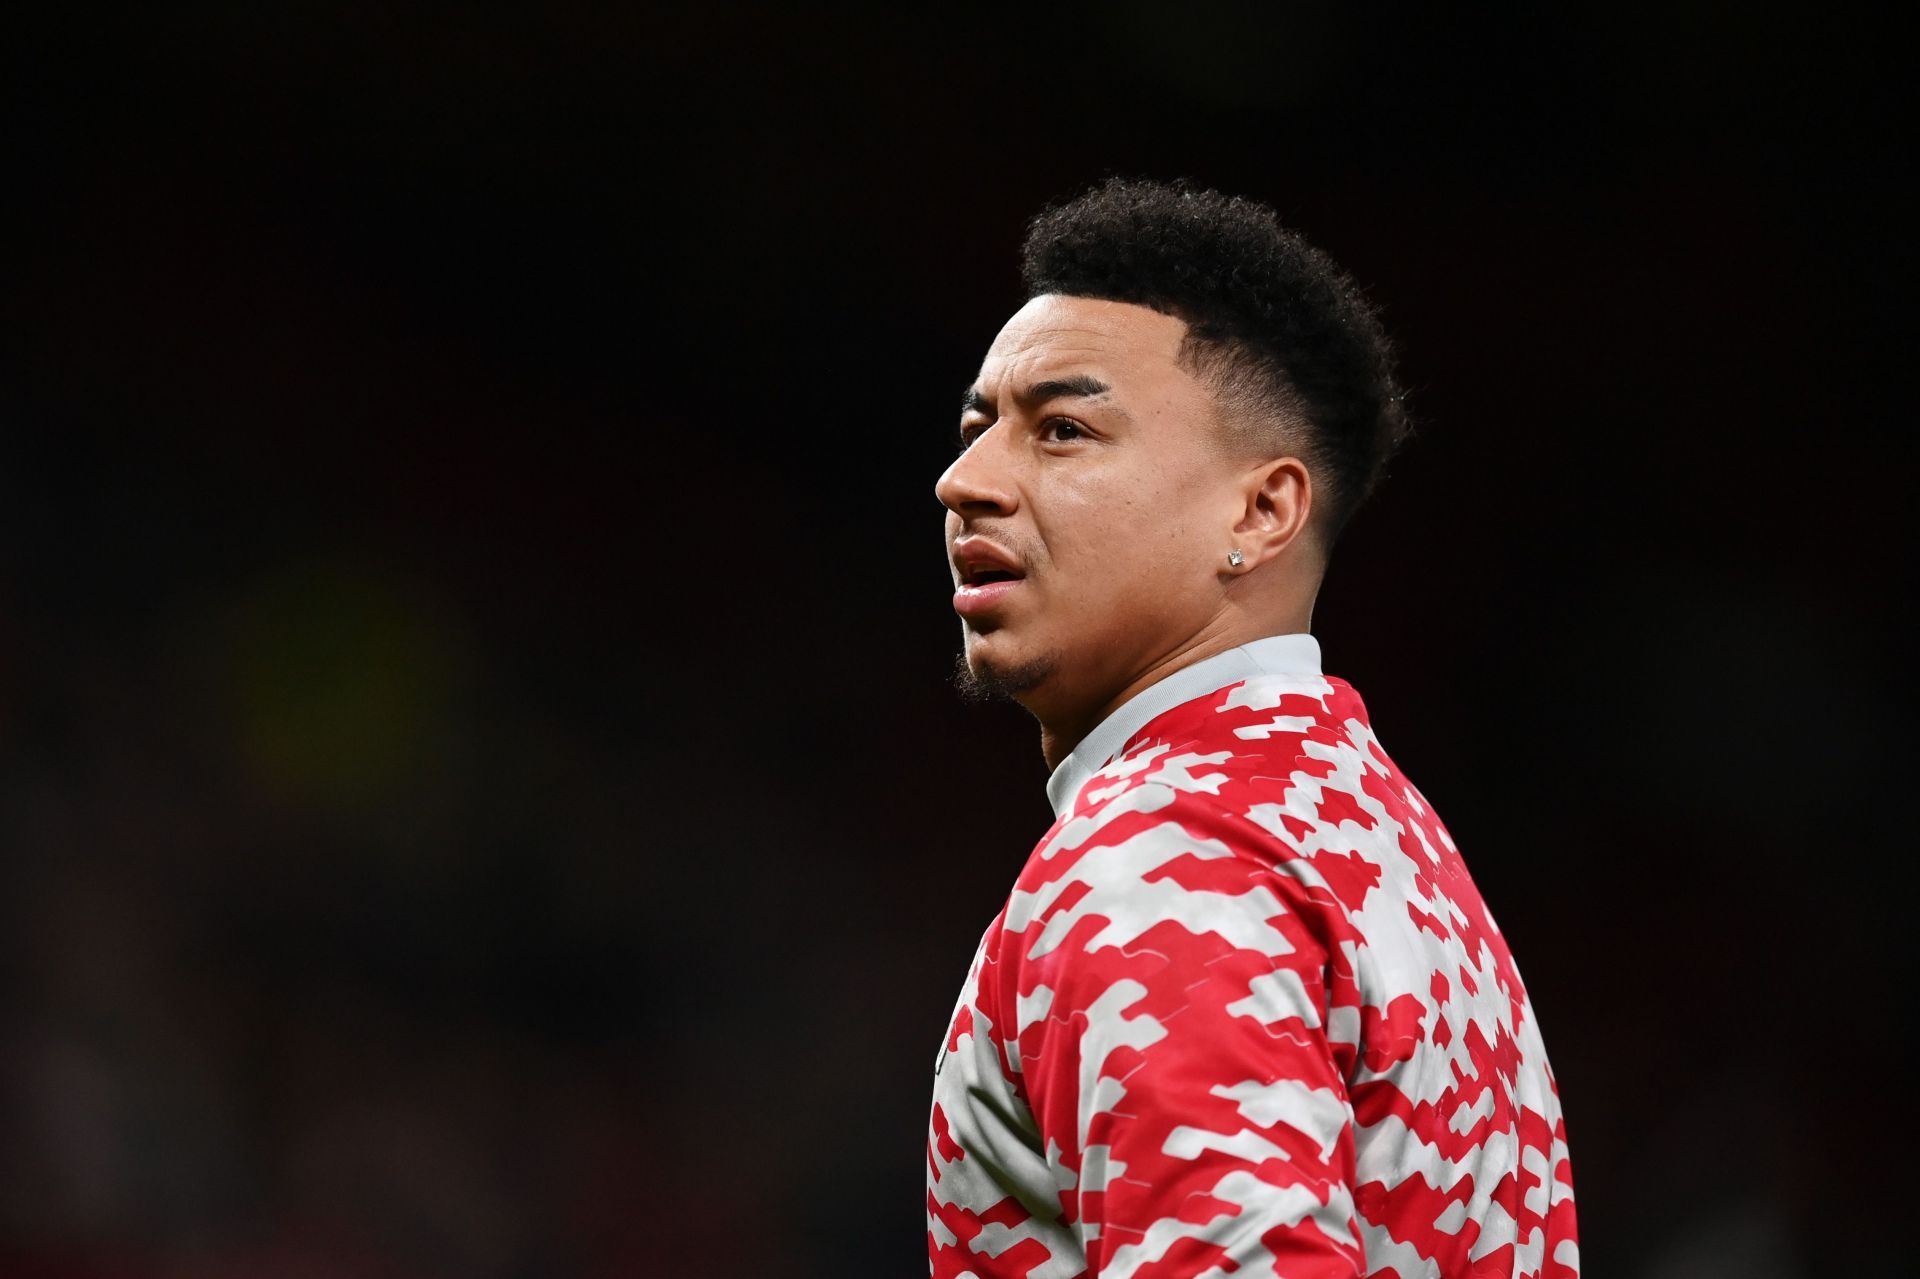 Tottenham Hotspur have initiated contact with Jesse Lingard to discuss a possible move this summer.